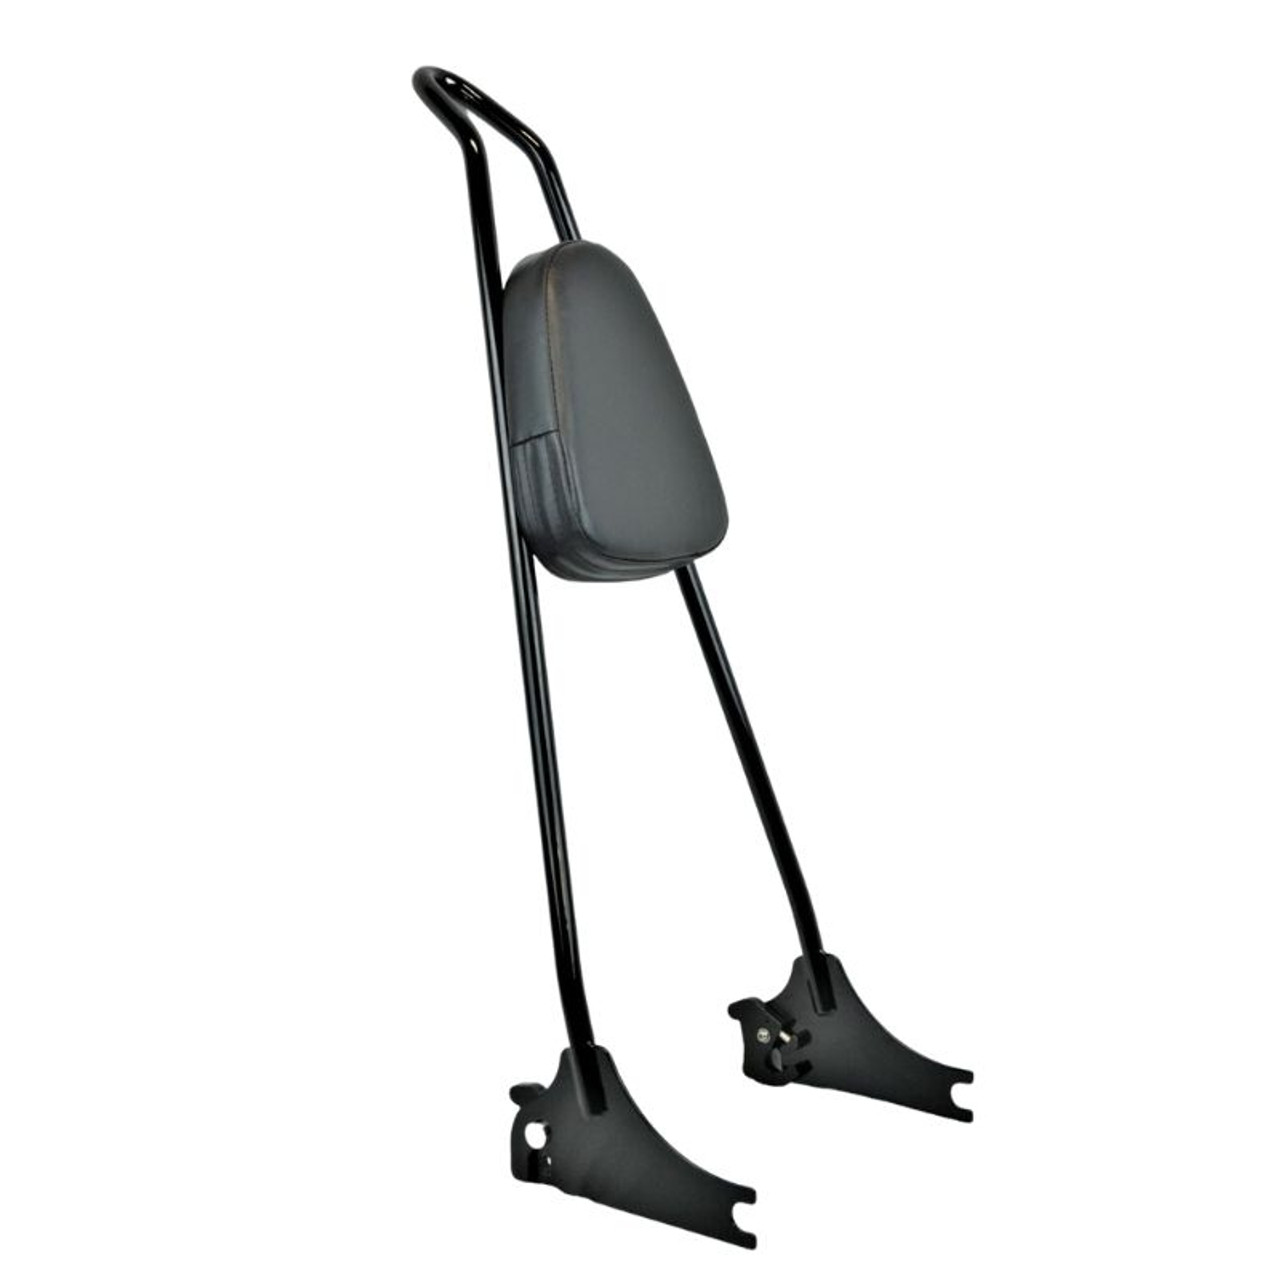 Blackline/Slim Quick Release Sissy Bar With Pad - 24"